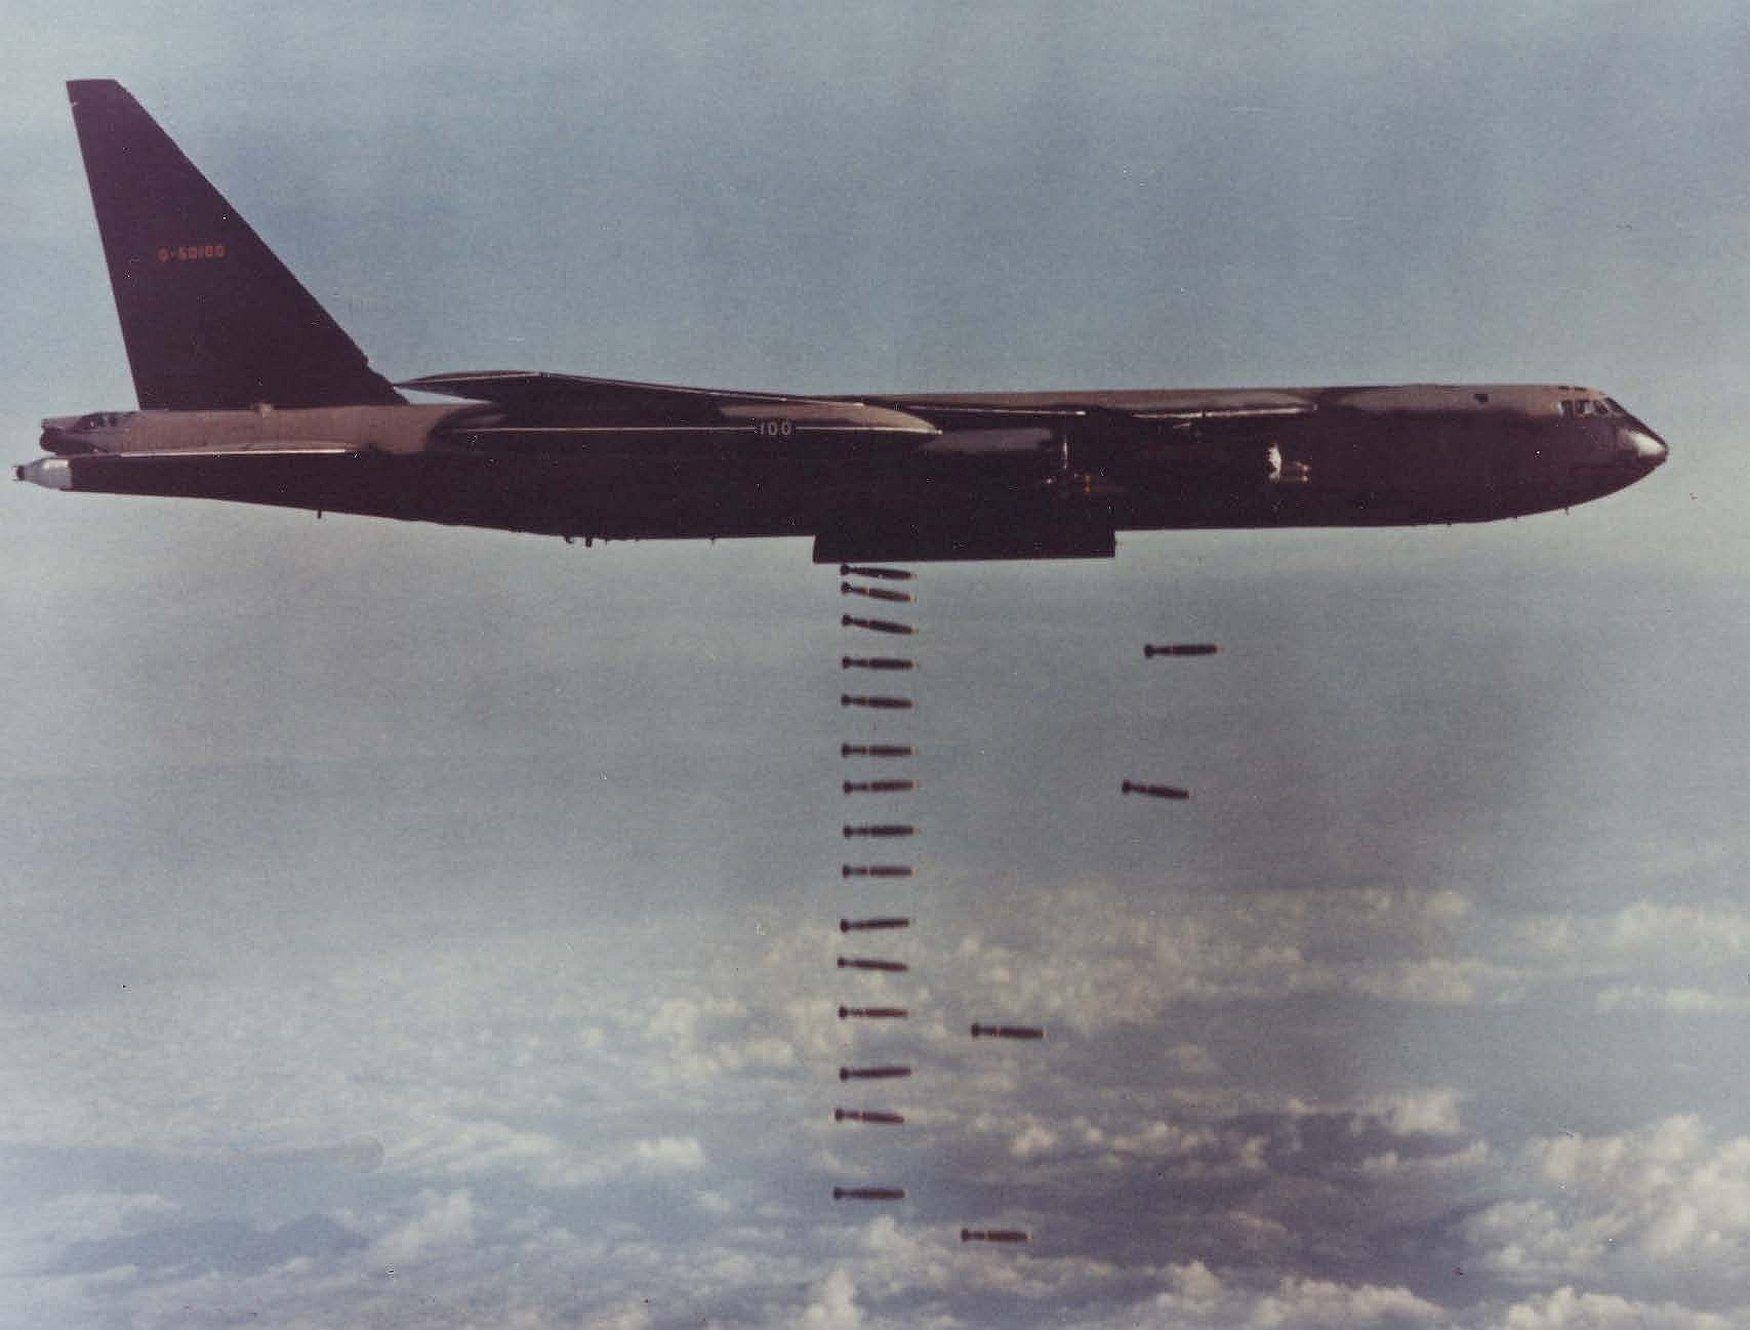 Dropping bombs over Vietnam Wallpaper and Background Imagex1330